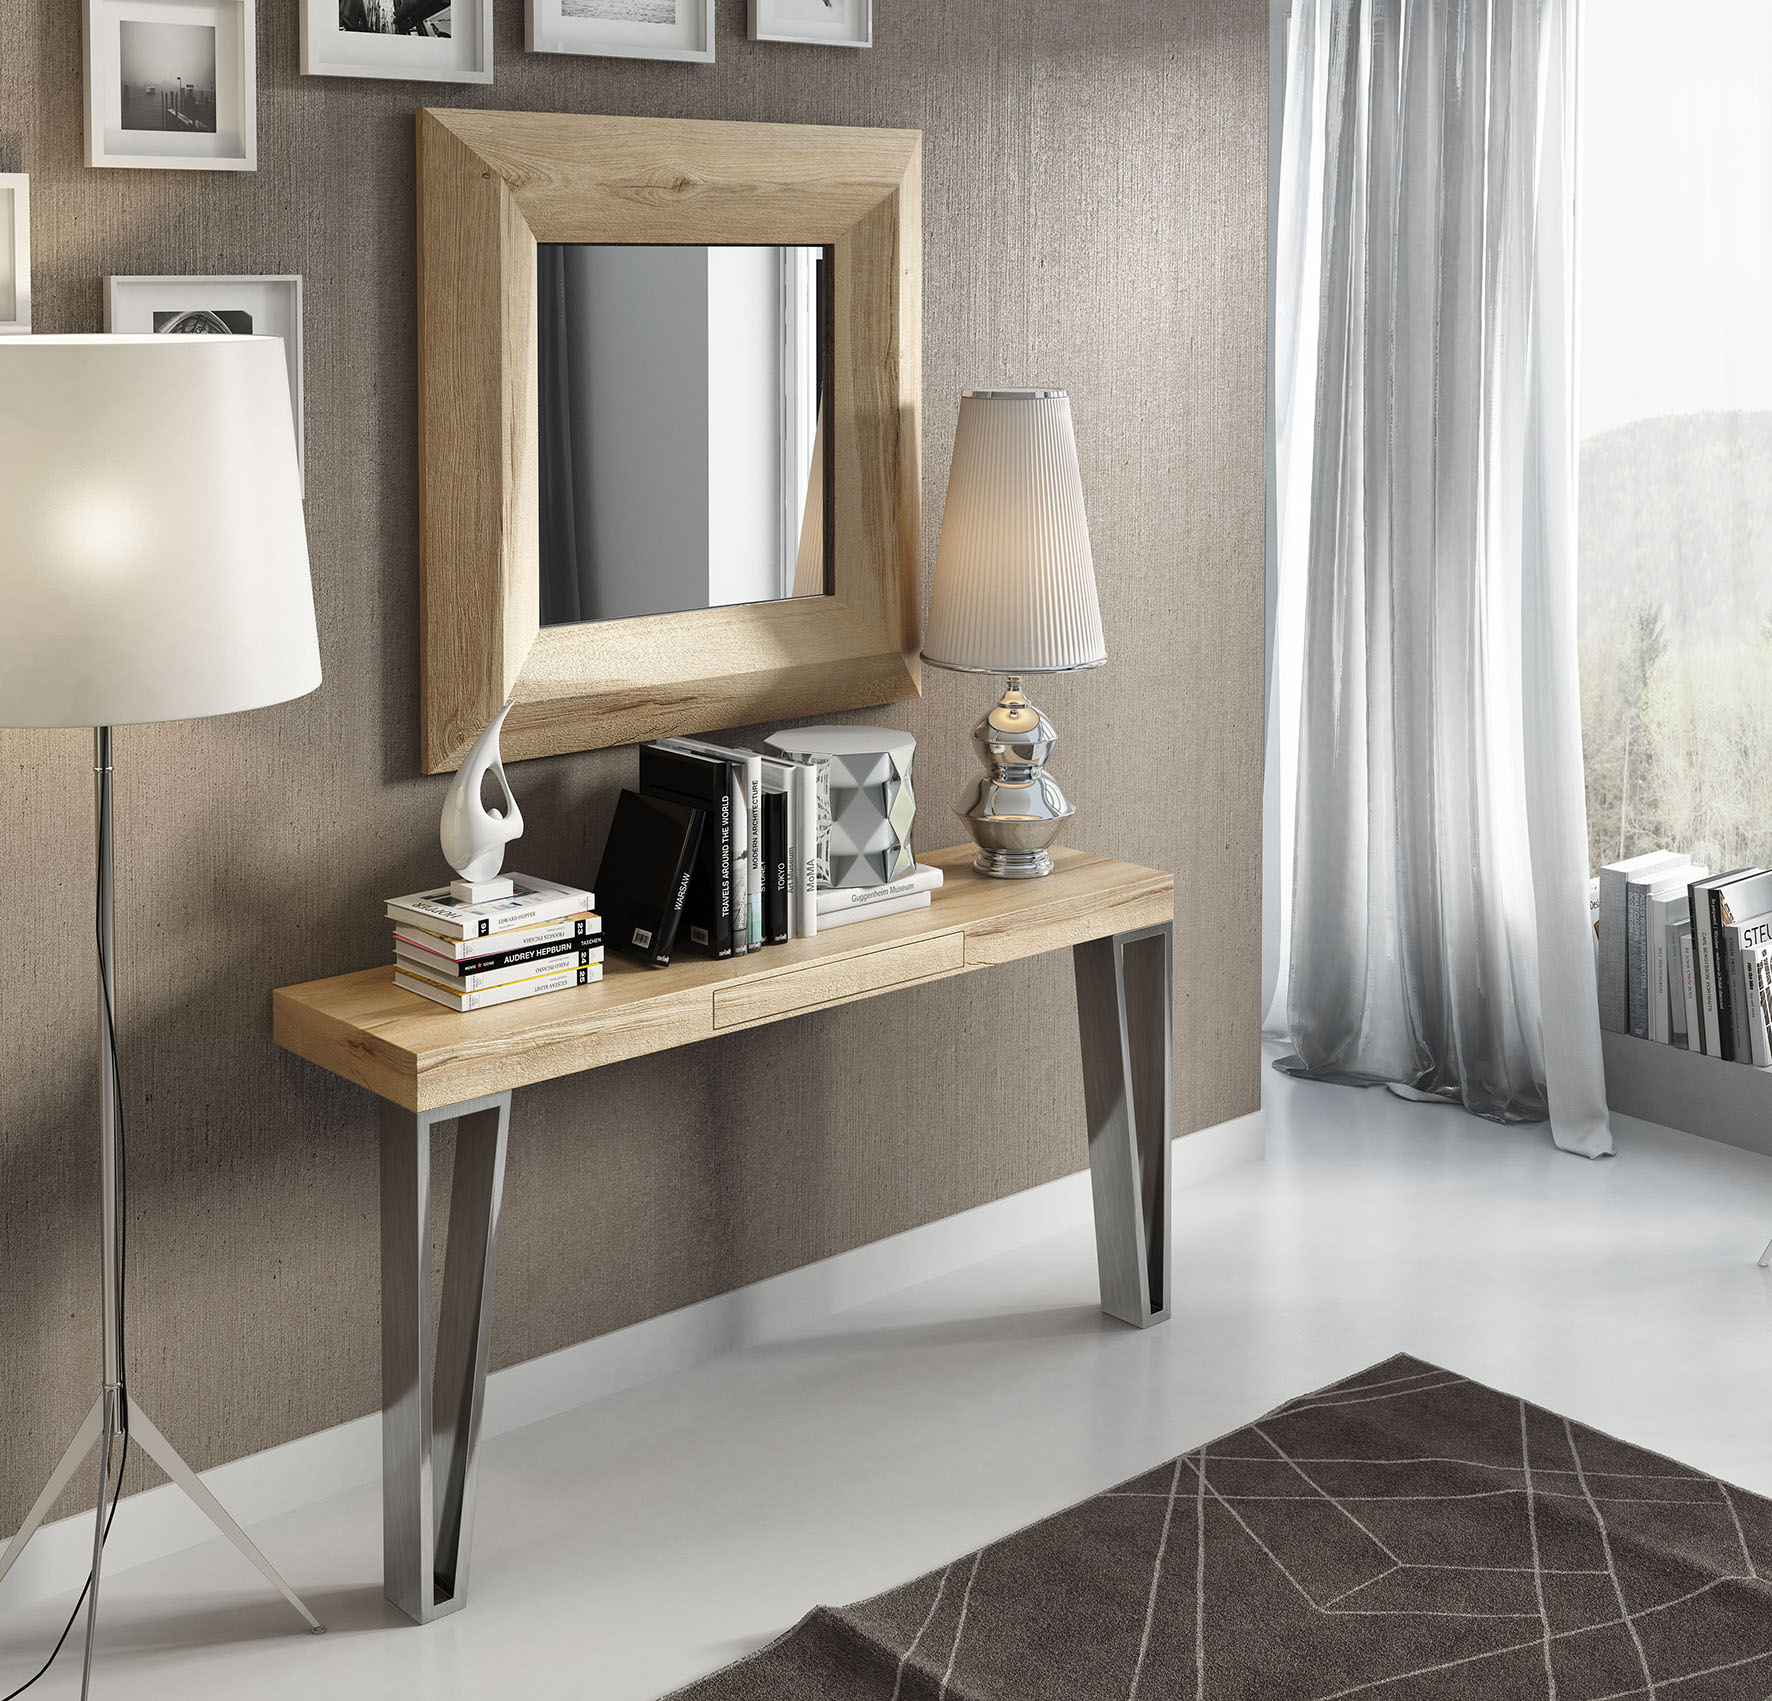 Brands Franco Kora Dining and Wall Units, Spain CII.43 Console Table